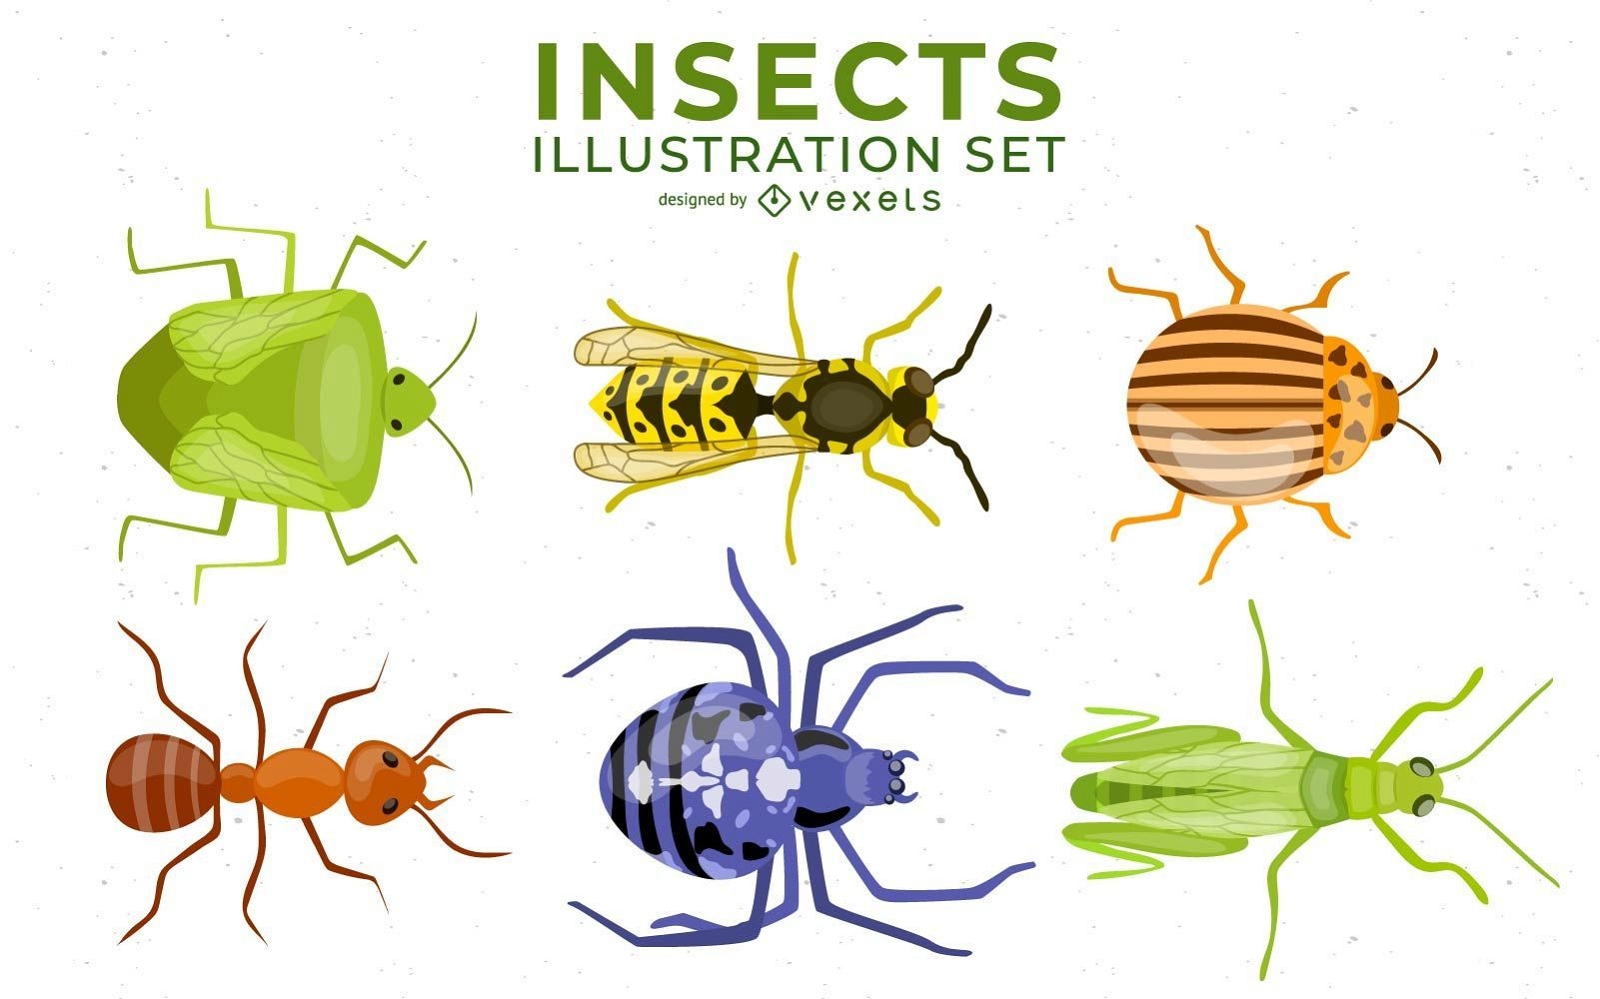 Insects Illustration Set